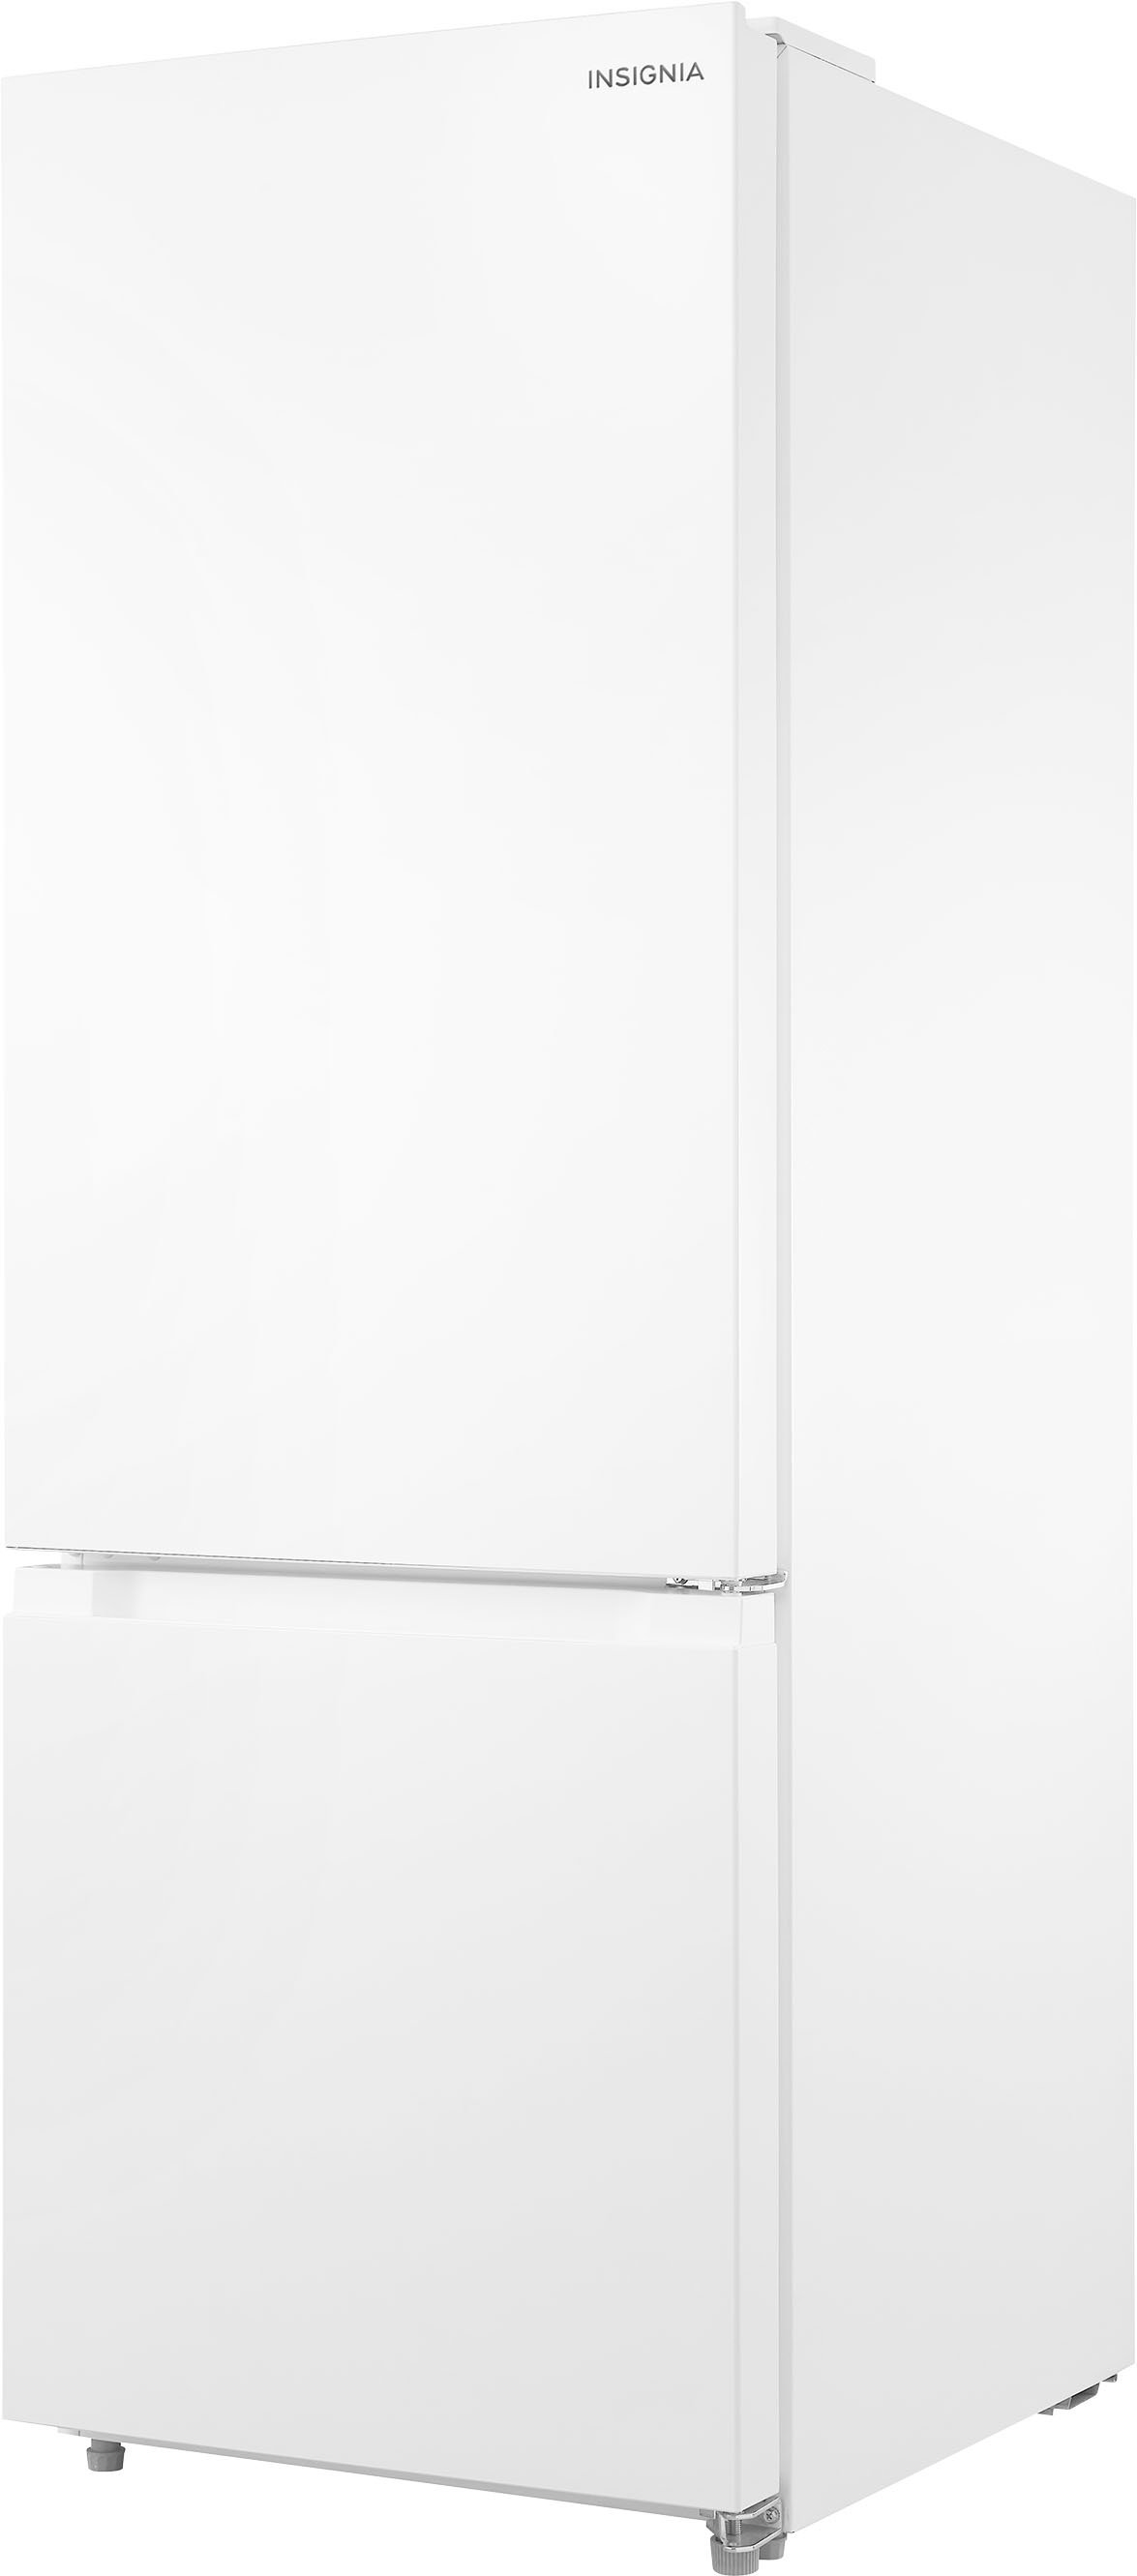 Left View: Insignia™ - 11.5 Cu. Ft. Bottom Mount Refrigerator with ENERGY STAR Certification - White